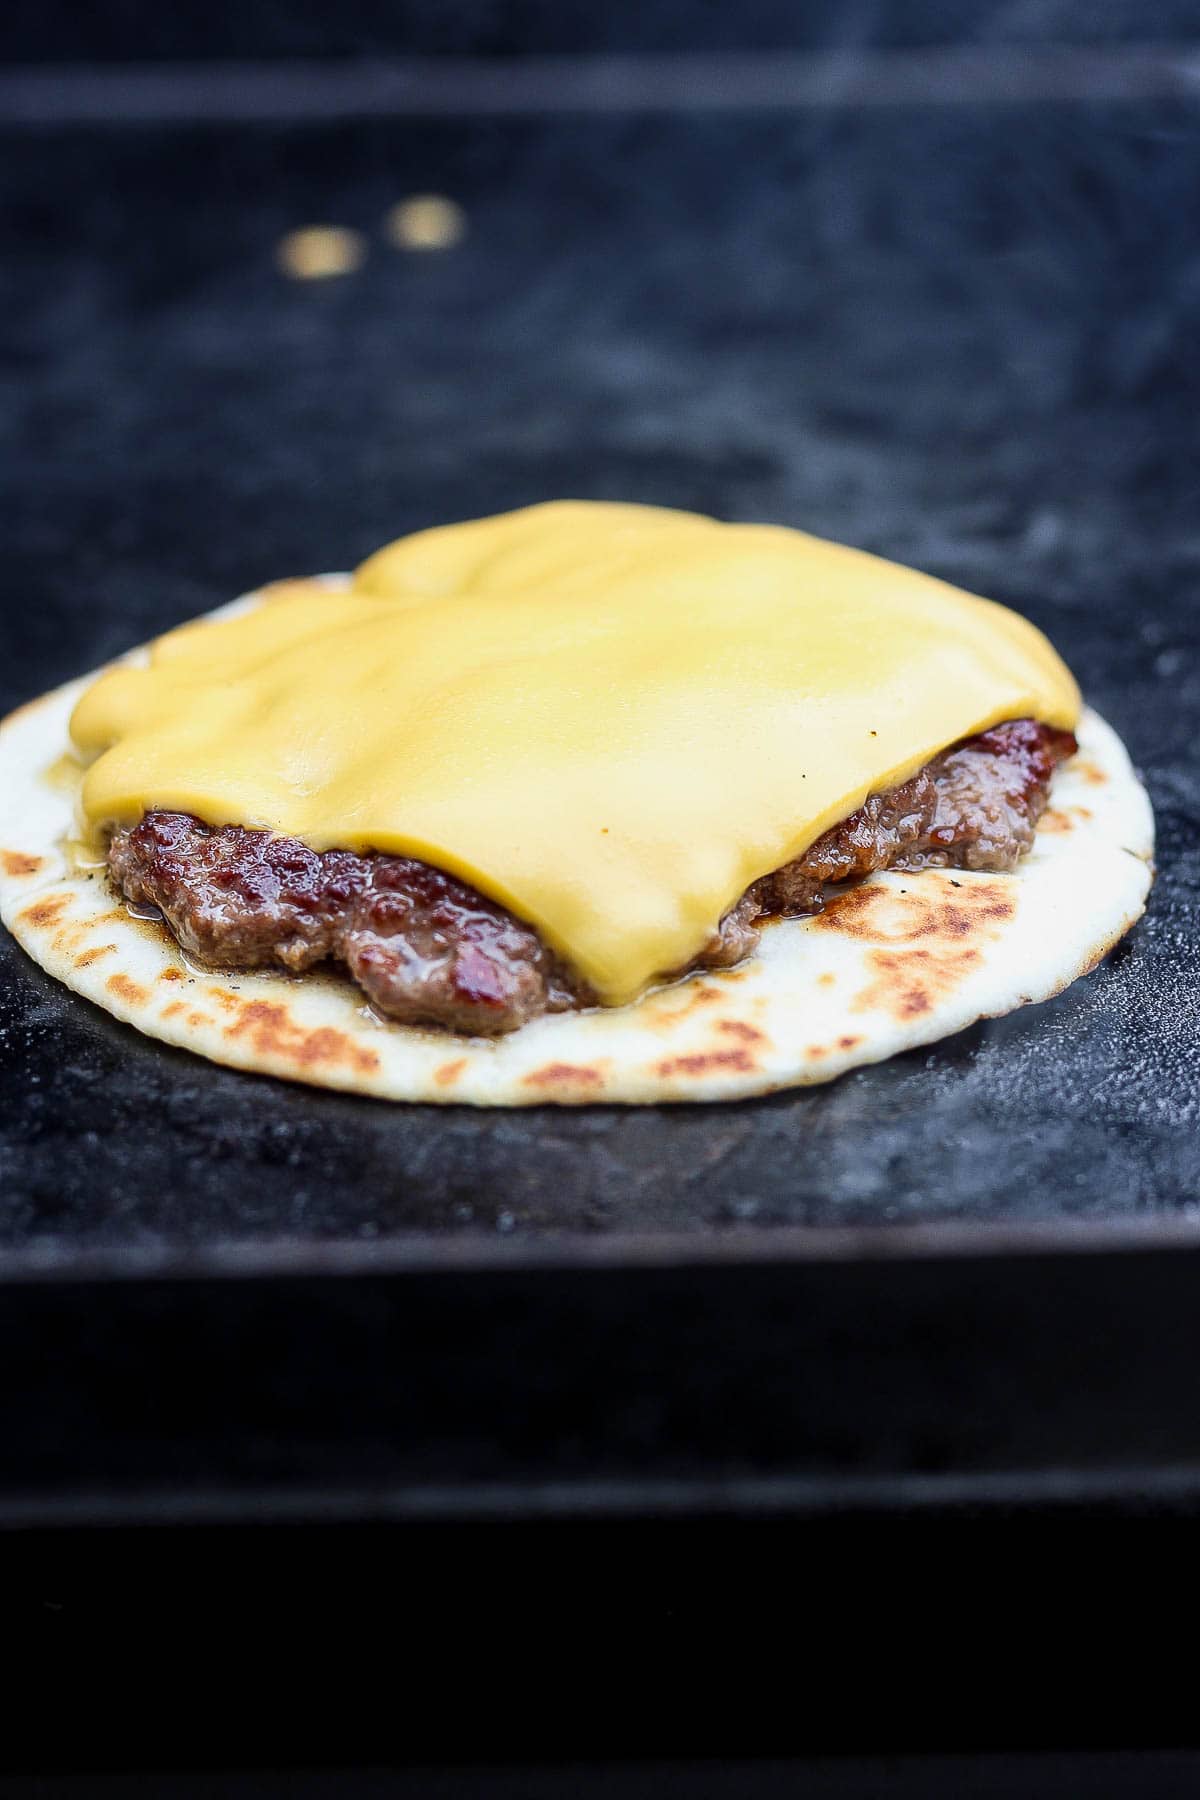 The burger patty with cheese is on top of the tortilla on the blackstone.